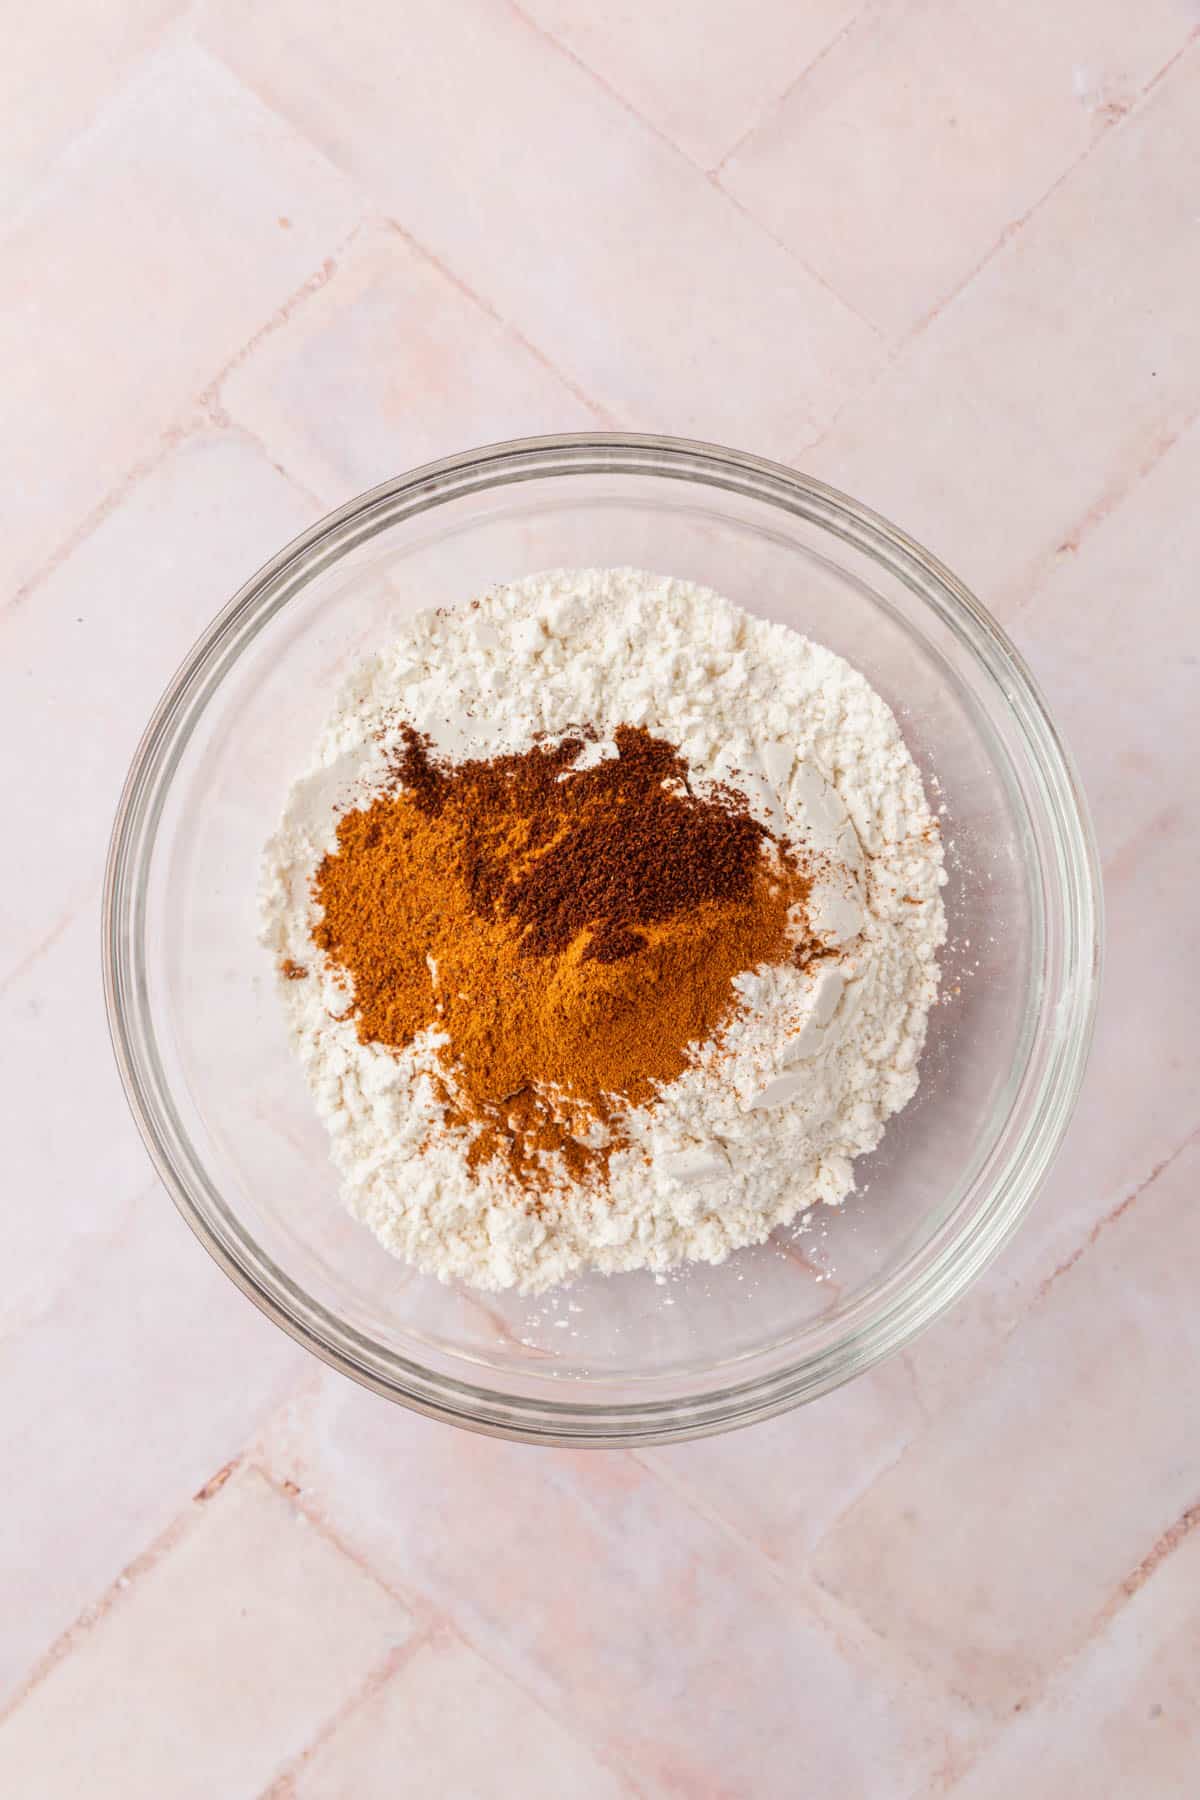 A glass mixing bowl with gluten-free flour blend, baking soda, baking powder, salt, cinnamon, nutmeg, and cloves before mixing.